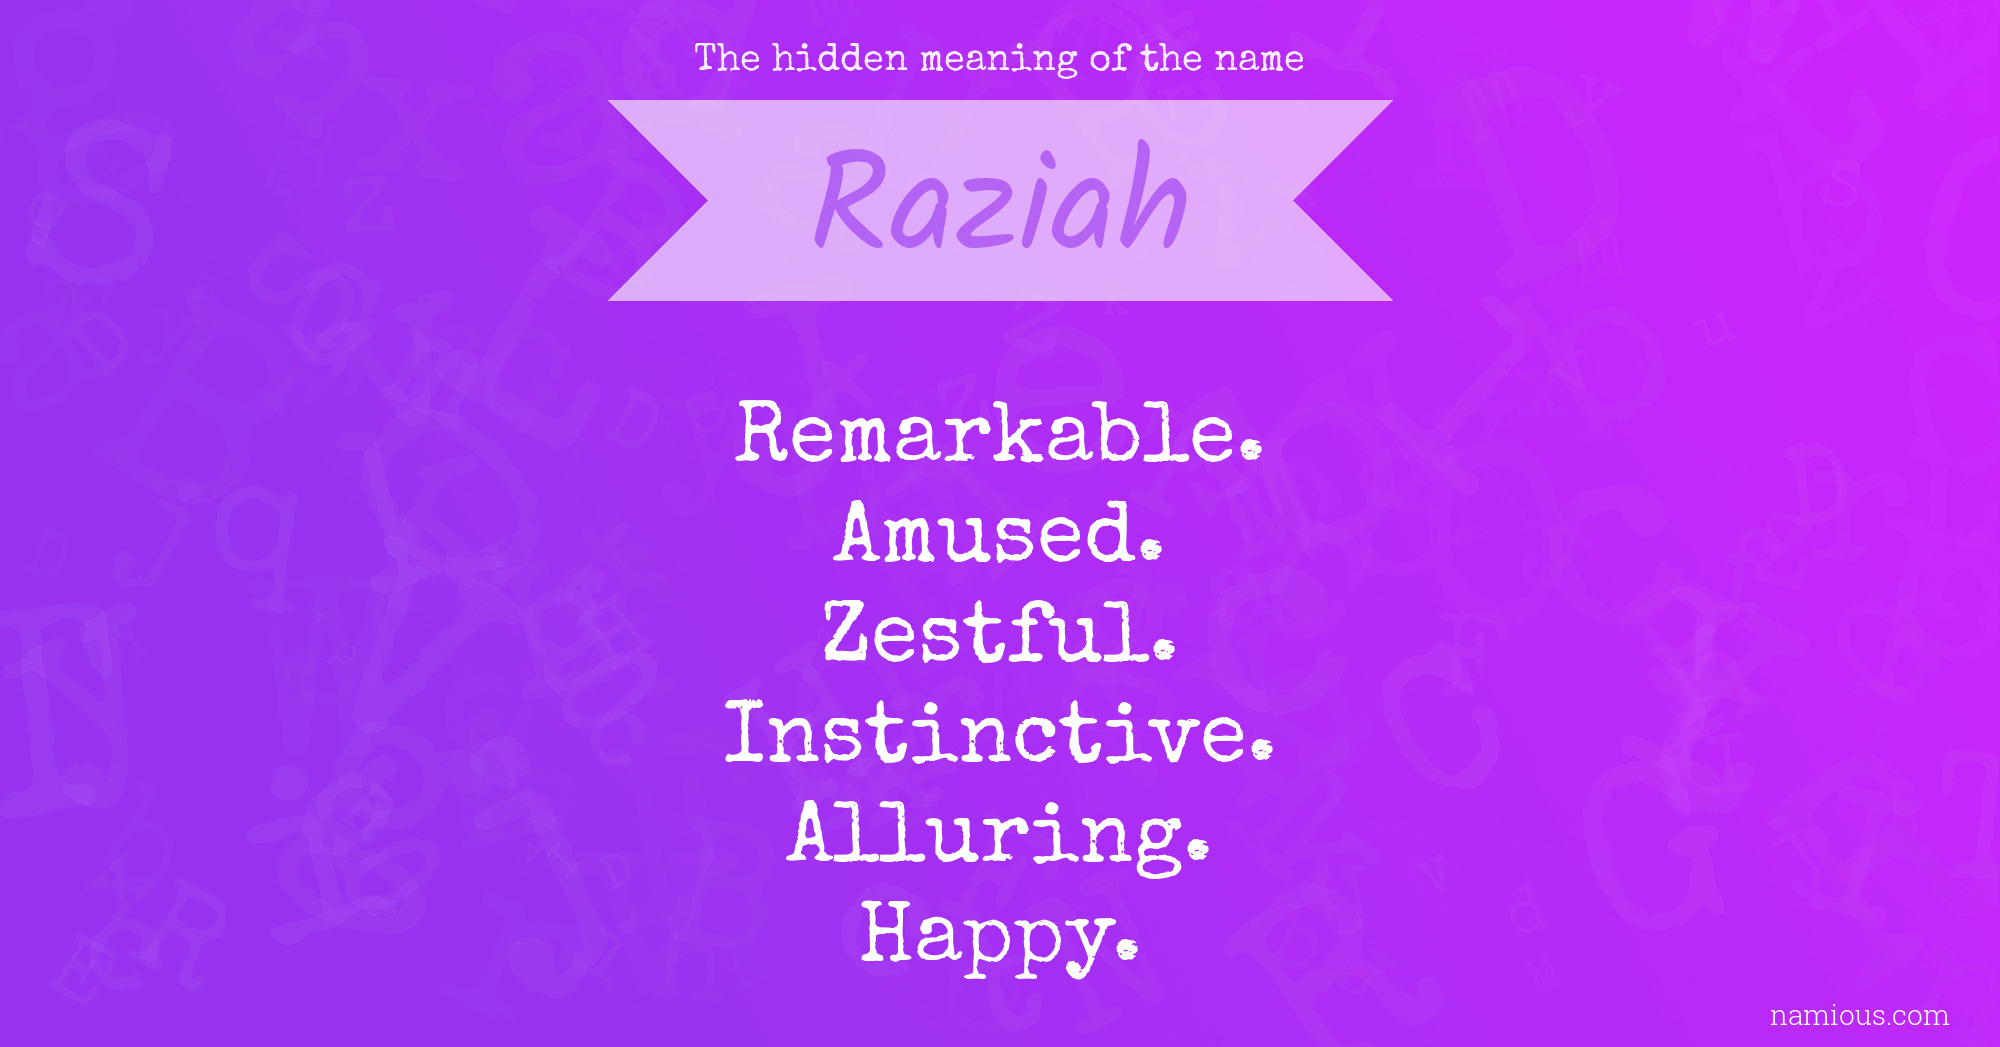 The hidden meaning of the name Raziah